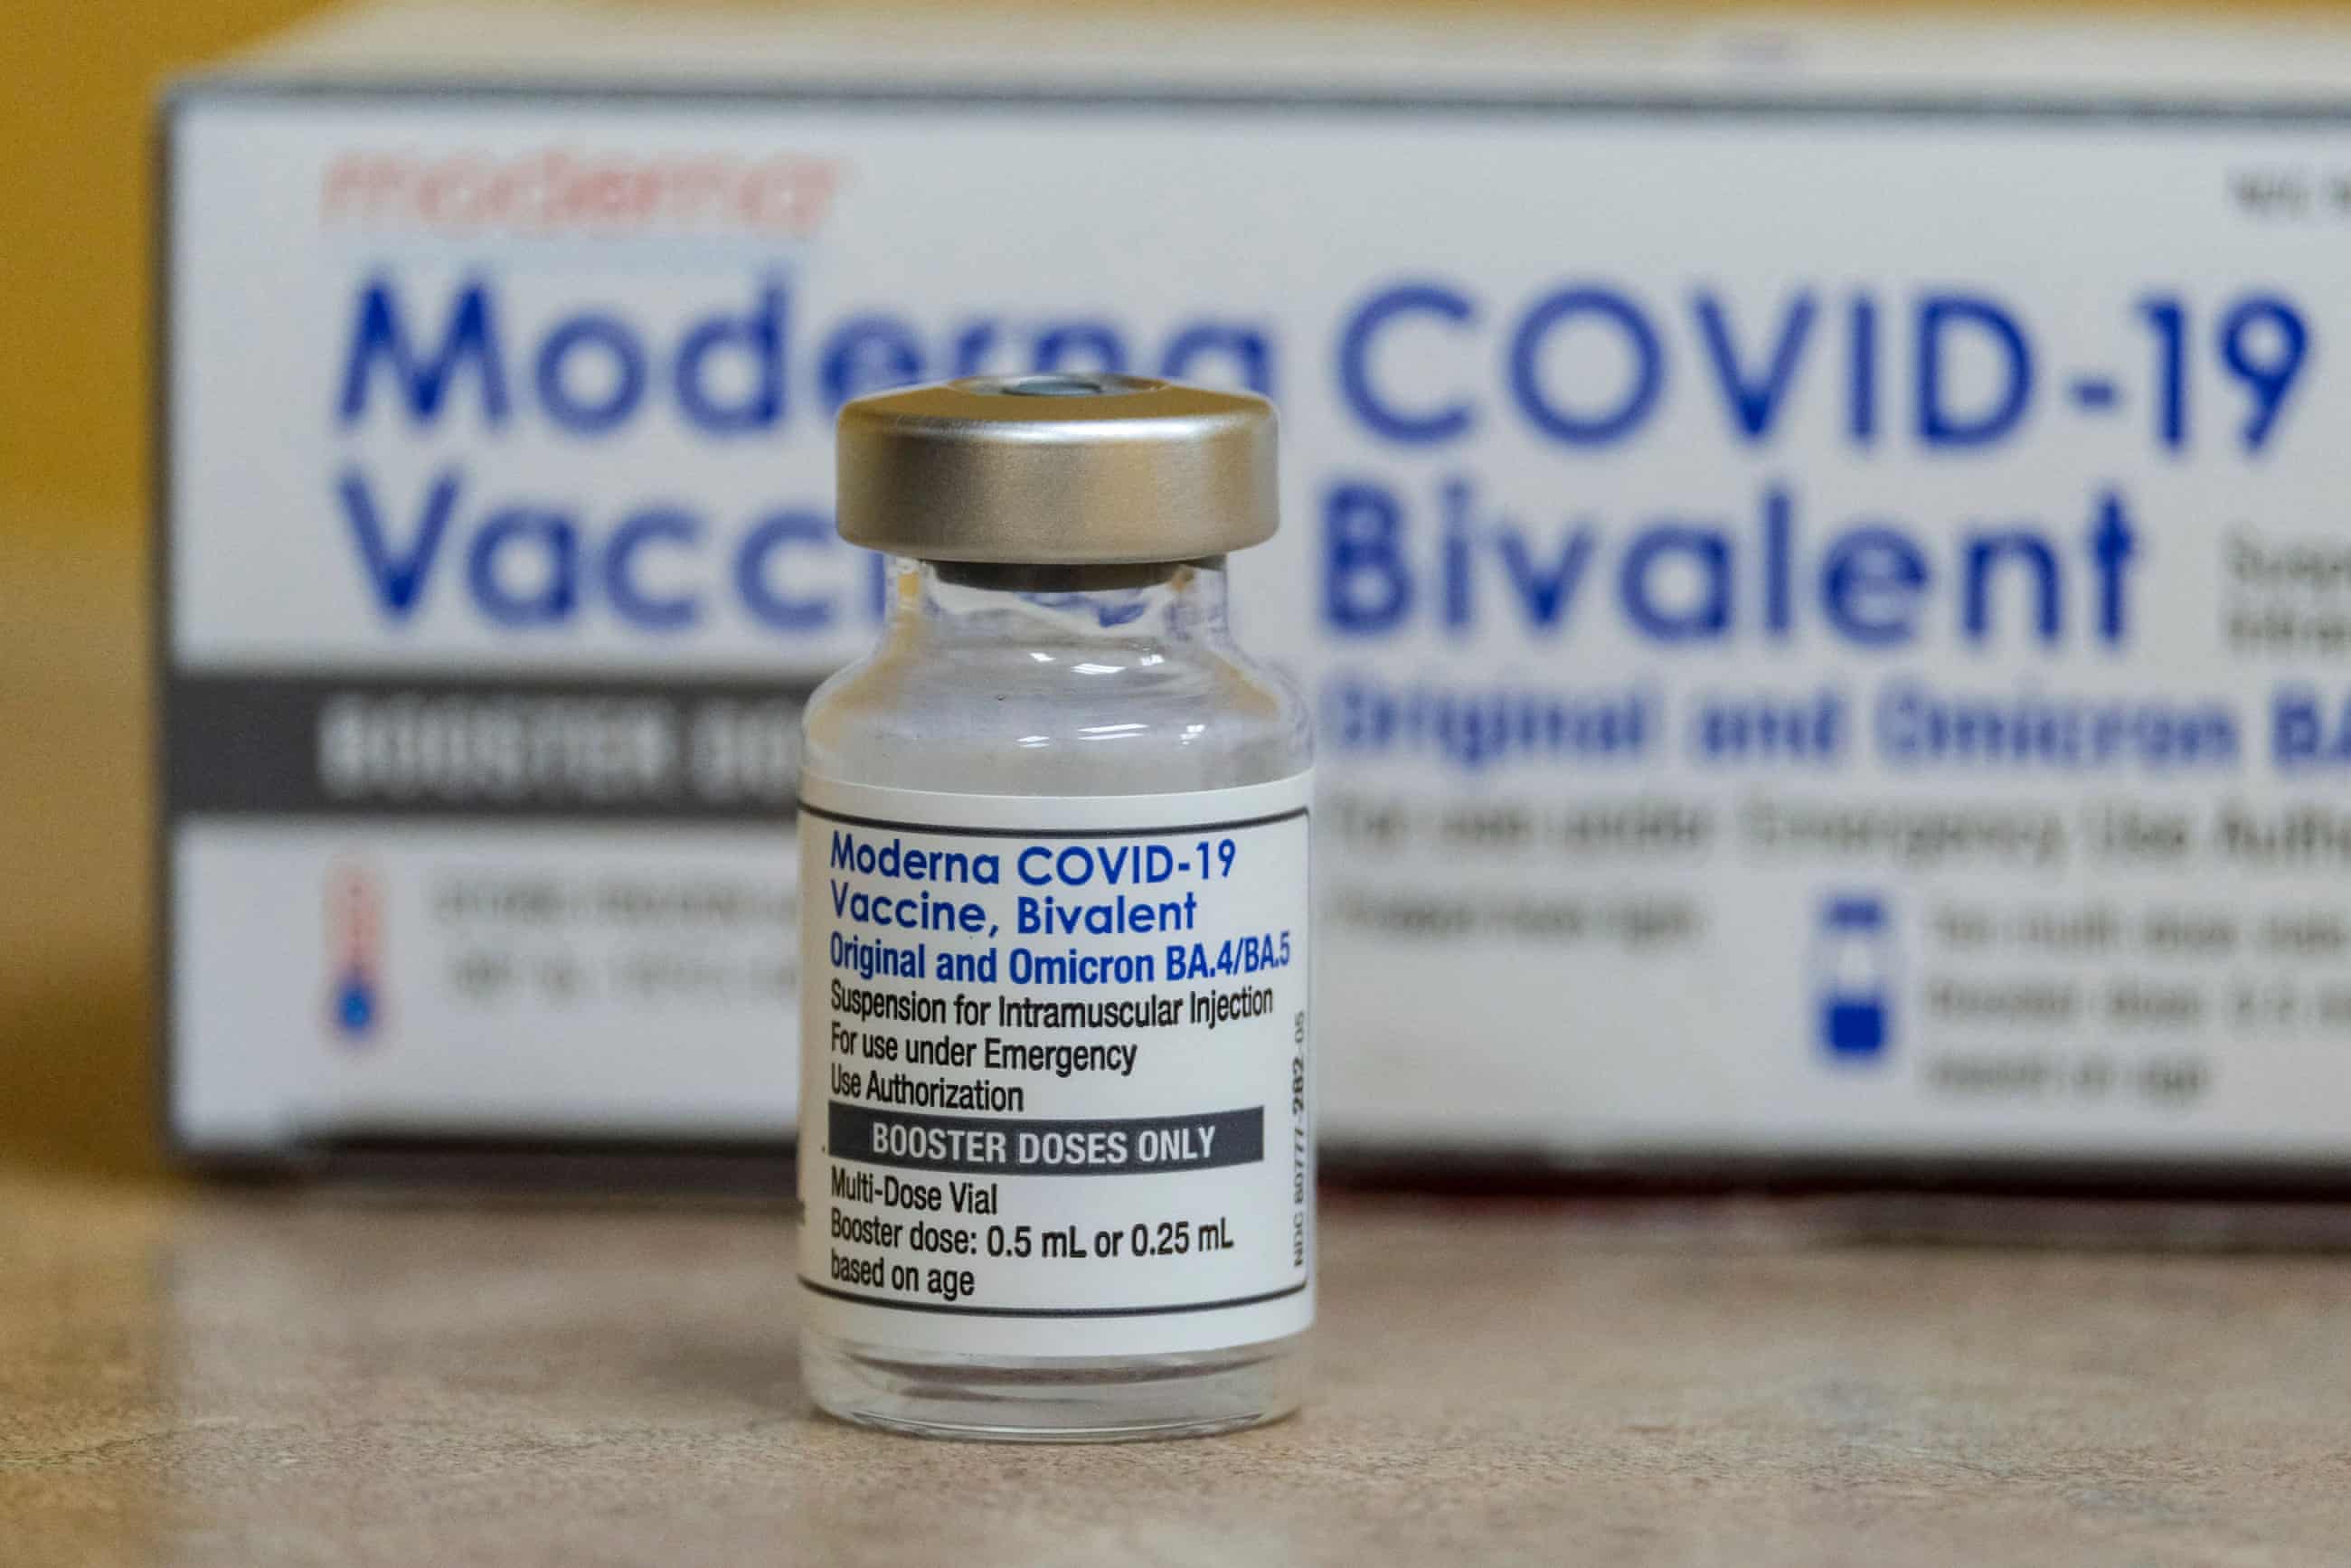 Nobel-nominated vaccine expert warns of Covid complacency: ‘We’re still losing too many lives’ (theguardian.com)